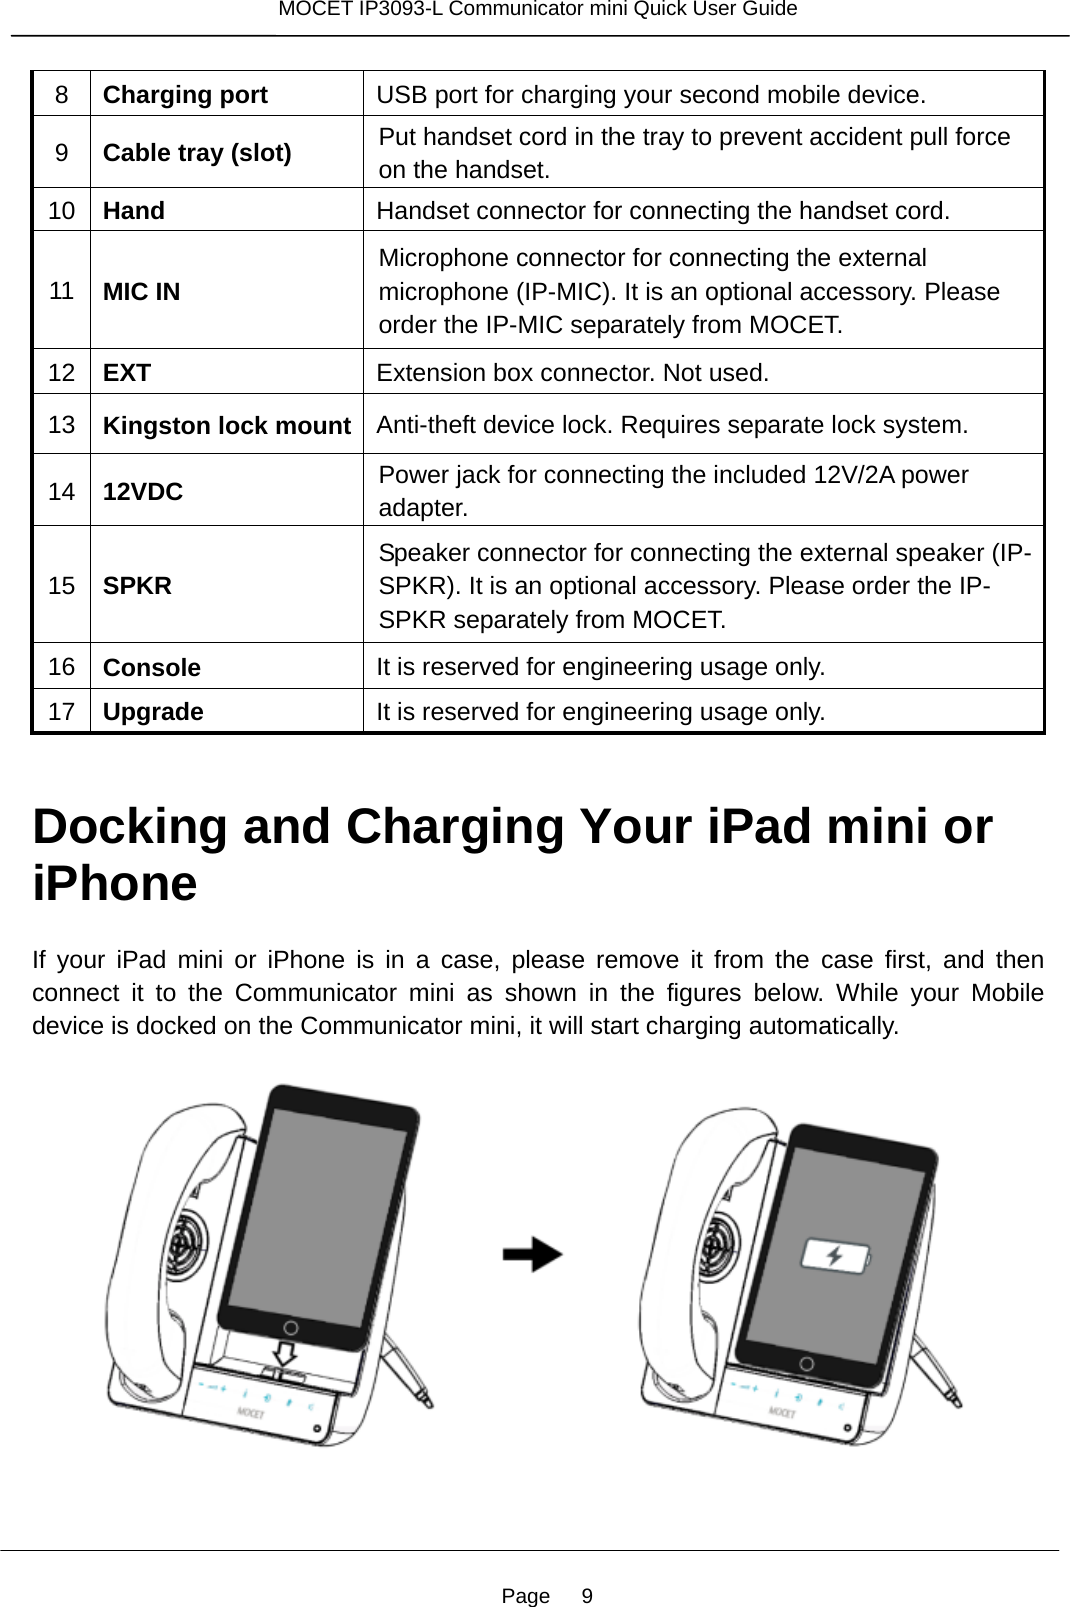 Page   9 MOCET IP3093-L Communicator mini Quick User Guide  8  Charging port  USB port for charging your second mobile device. 9  Cable tray (slot)  Put handset cord in the tray to prevent accident pull force on the handset.   10  Hand  Handset connector for connecting the handset cord. 11  MIC IN  Microphone connector for connecting the external microphone (IP-MIC). It is an optional accessory. Please order the IP-MIC separately from MOCET. 12  EXT  Extension box connector. Not used. 13  Kingston lock mount  Anti-theft device lock. Requires separate lock system. 14  12VDC  Power jack for connecting the included 12V/2A power adapter. 15  SPKR  Speaker connector for connecting the external speaker (IP-SPKR). It is an optional accessory. Please order the IP-SPKR separately from MOCET. 16  Console  It is reserved for engineering usage only. 17  Upgrade  It is reserved for engineering usage only.   Docking and Charging Your iPad mini or iPhone   If your iPad mini or iPhone is in a case, please remove it from the case first, and then connect it to the Communicator mini as shown in the figures below. While your Mobile device is docked on the Communicator mini, it will start charging automatically.   